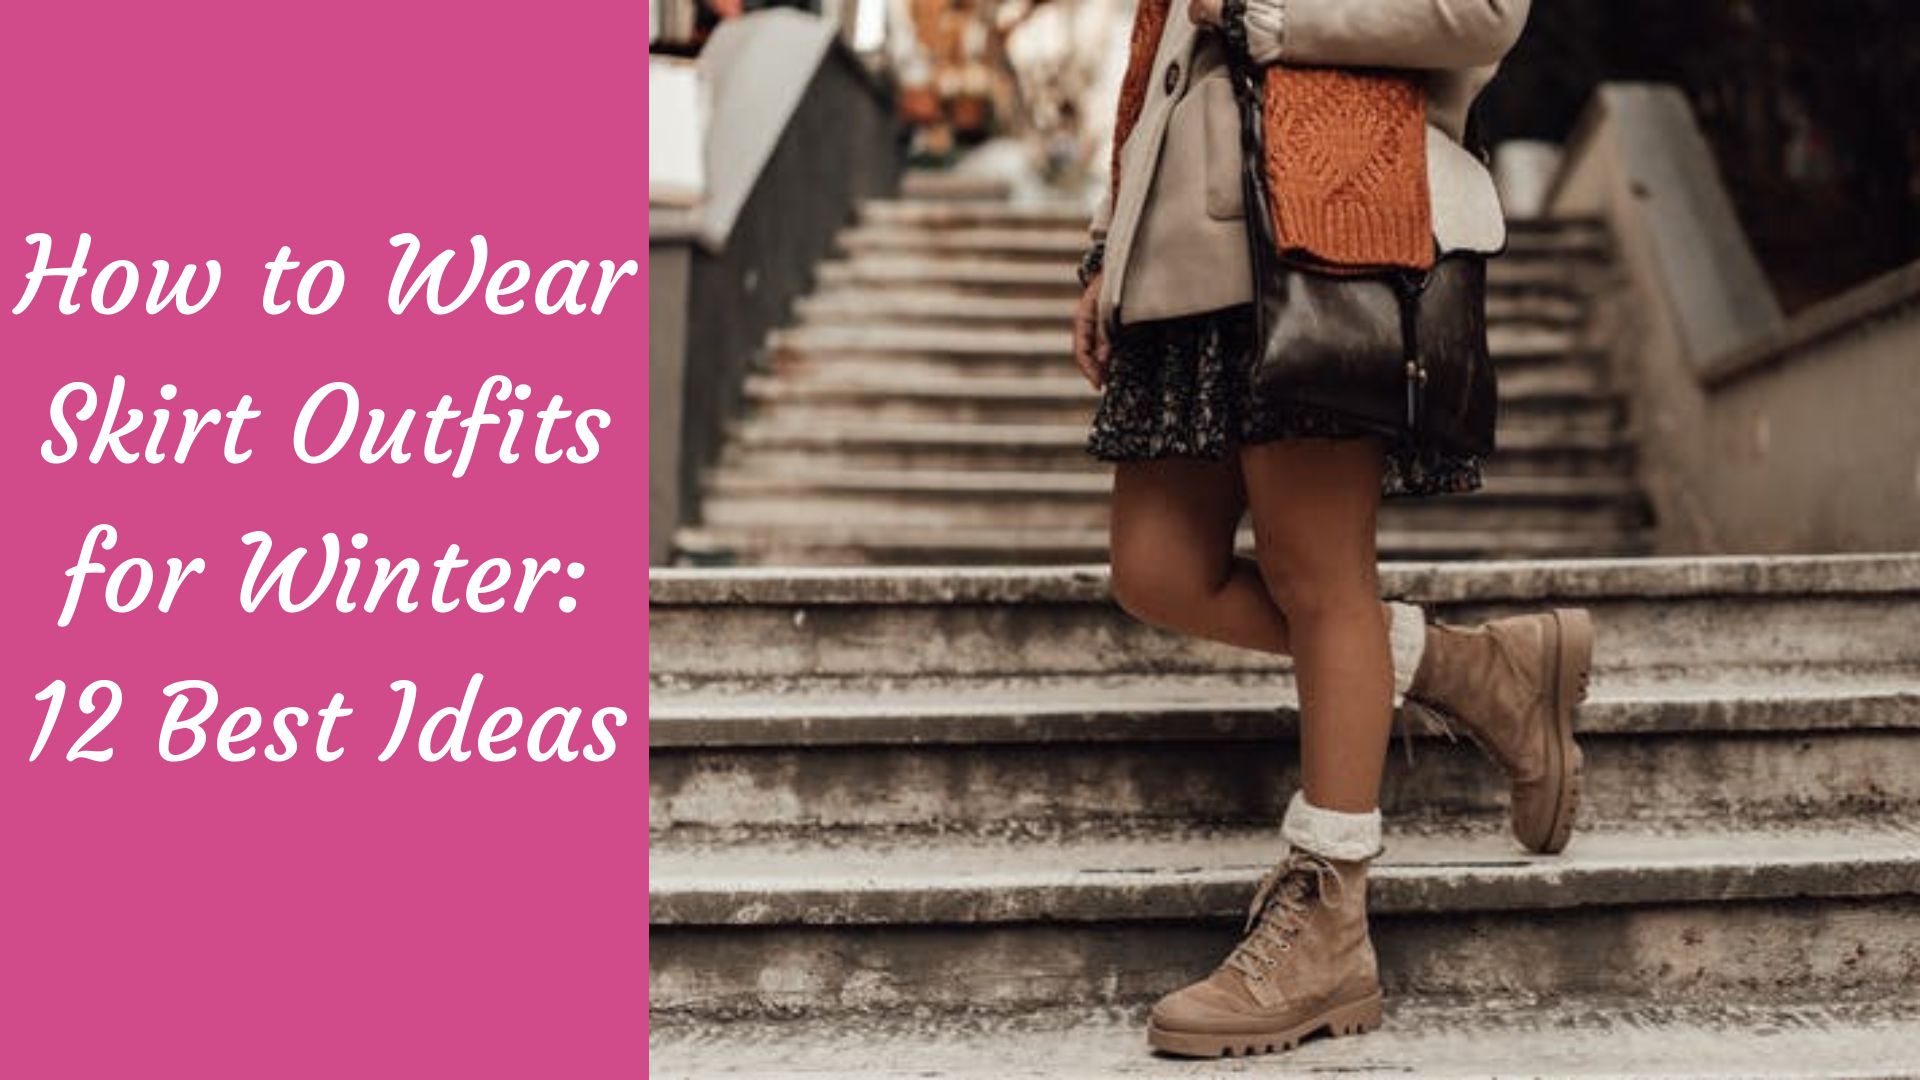 How to Wear Skirt Outfits for Winter: 12 Best Ideas - The Kosha